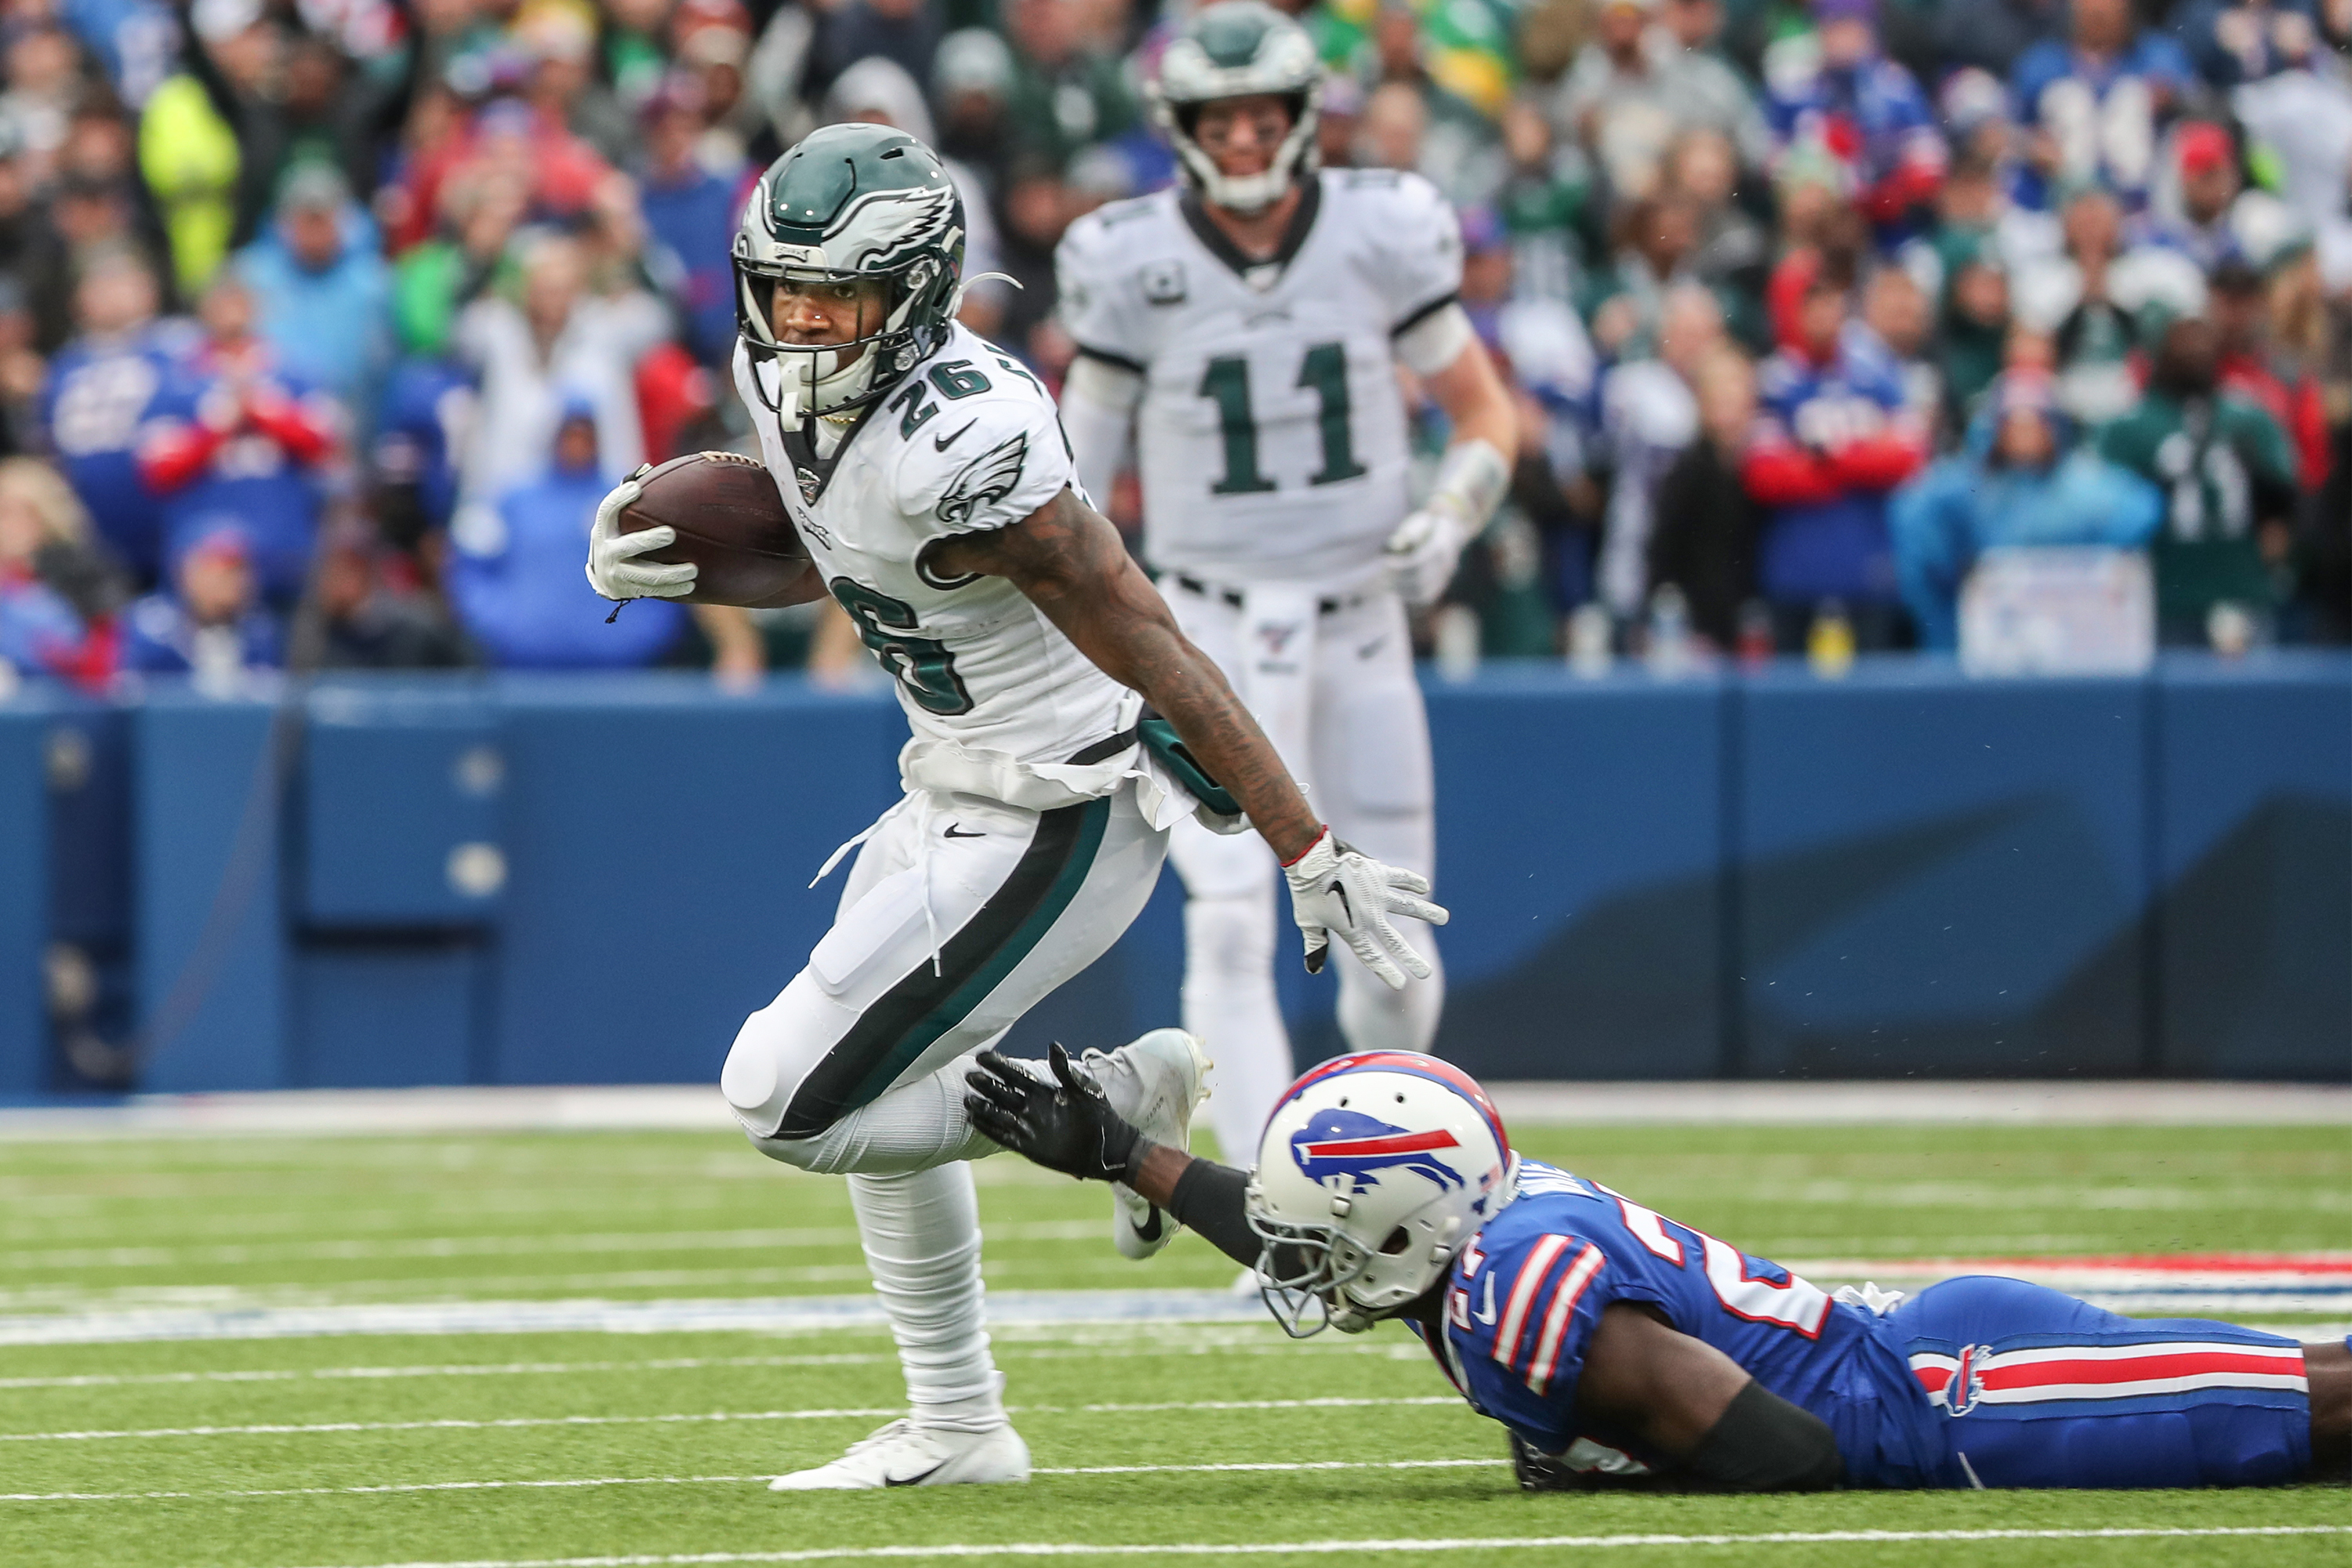 How Eagles' Miles Sanders used a subtle coaching tip in 'huge play